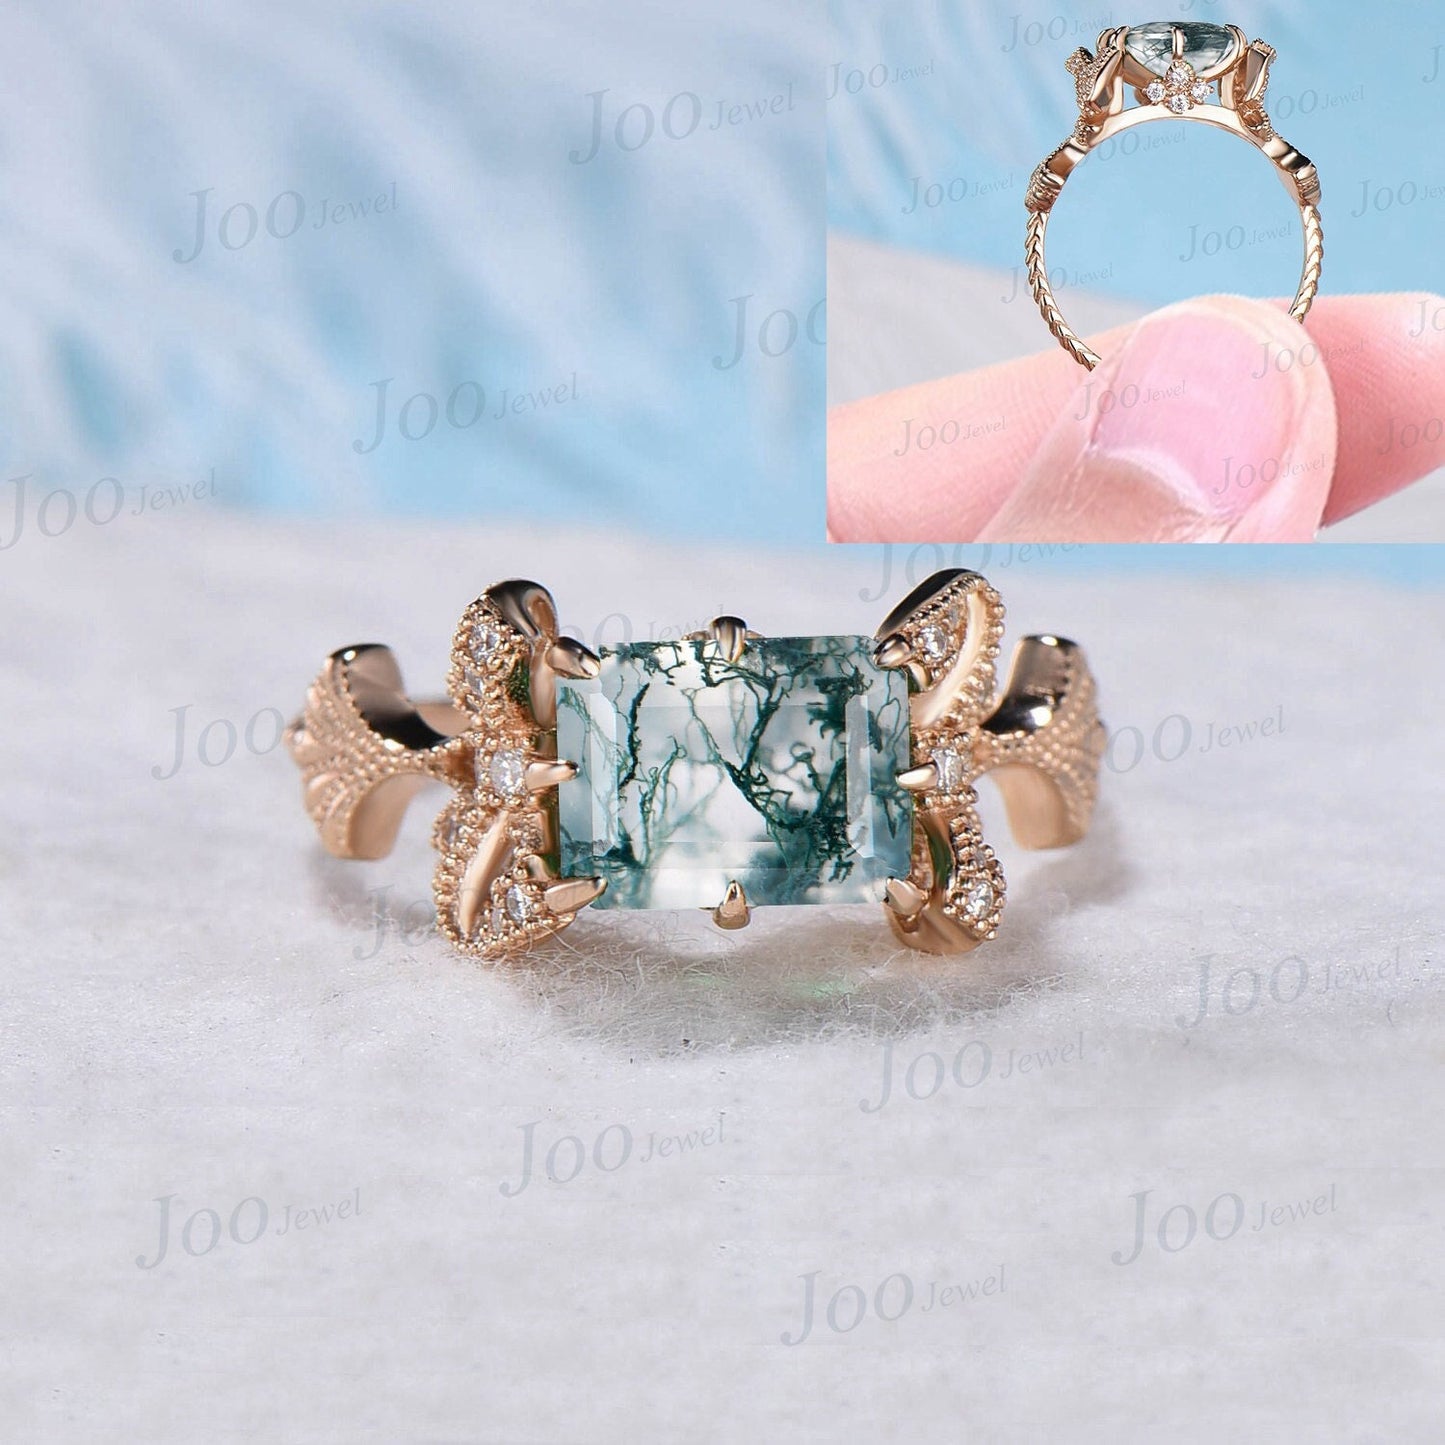 Nature Inspired Green Moss Agate Engagement Ring Ginkgo Biloba Leaf Ring 10K Gold Ginkgo Jewelry Bow Tie Moissanite West East Wedding Rings